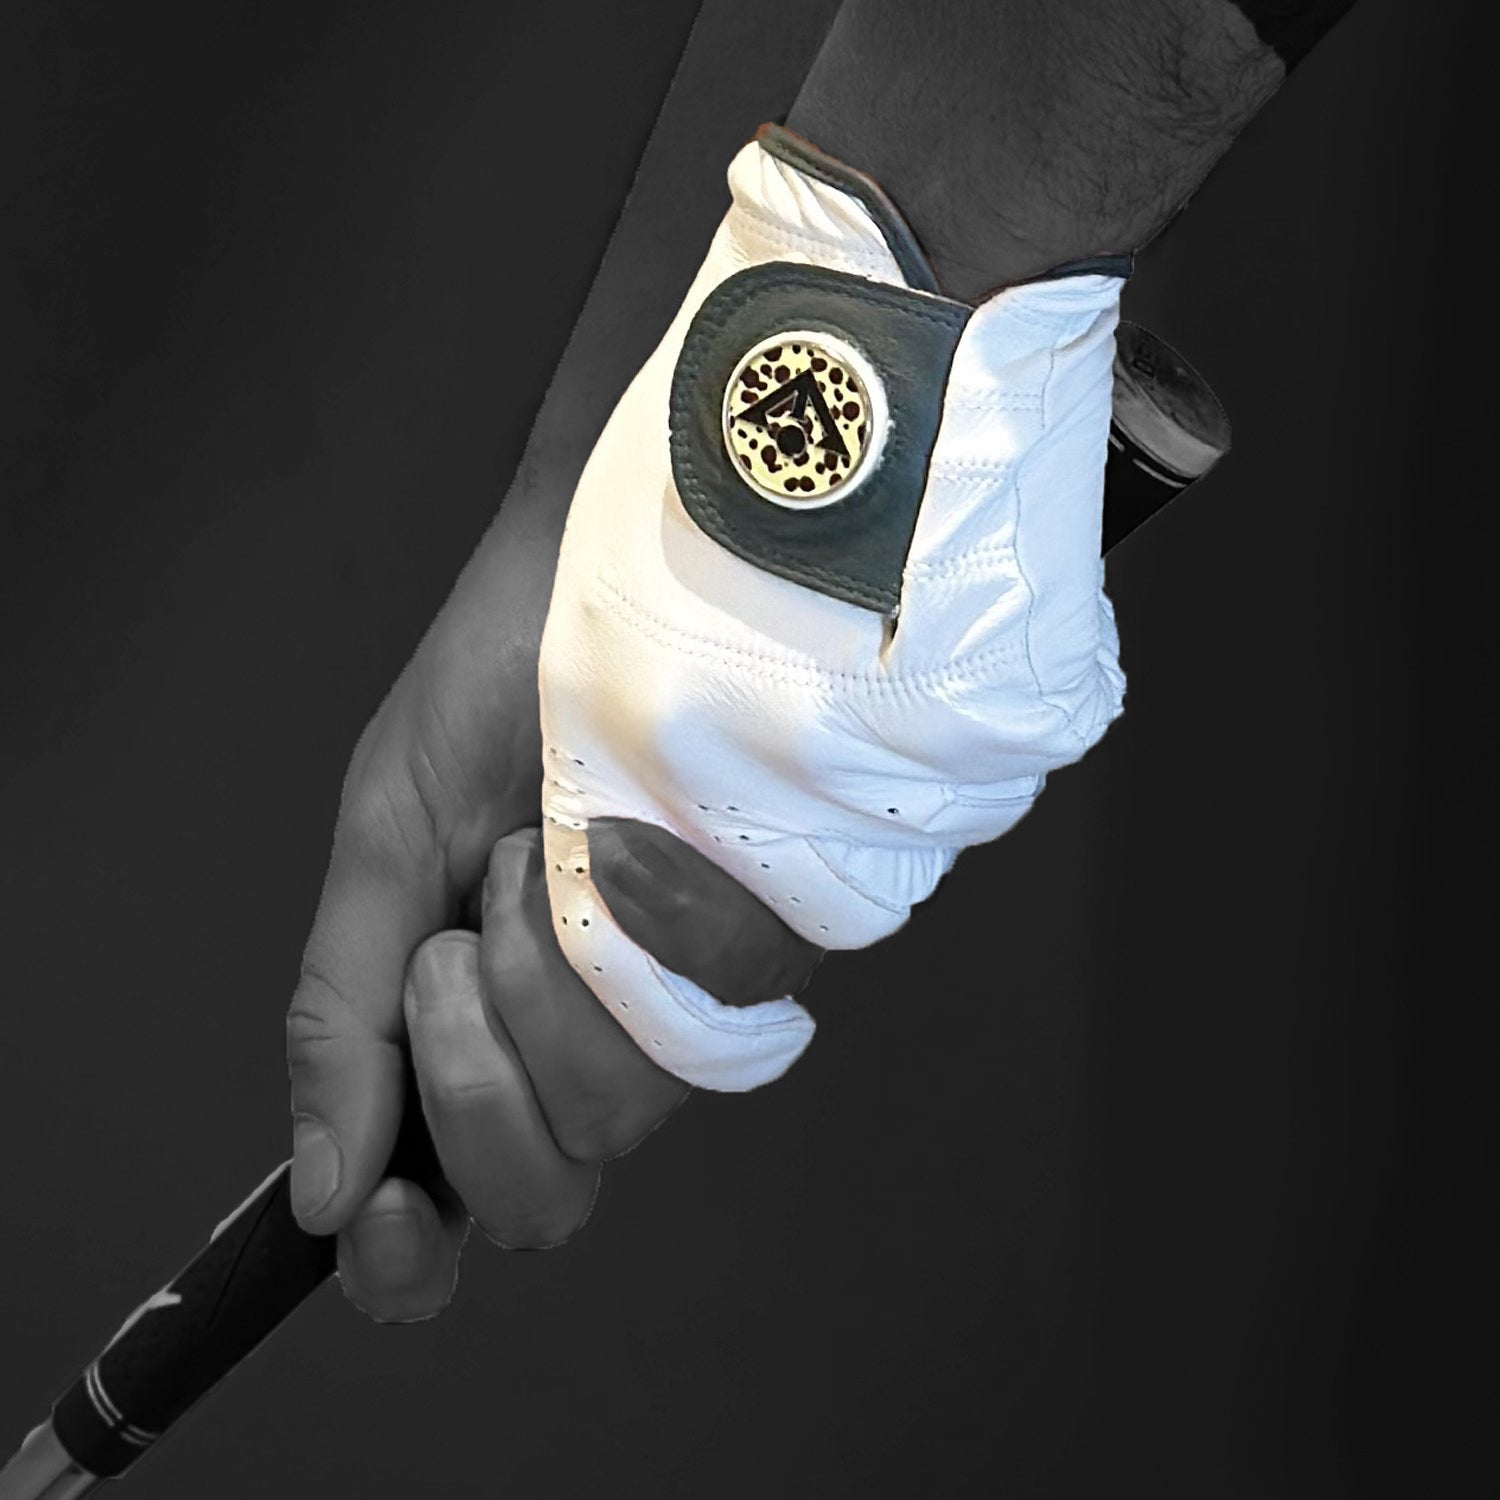 women's colored golf glove with a cheetah print ball marker across a black and white background.